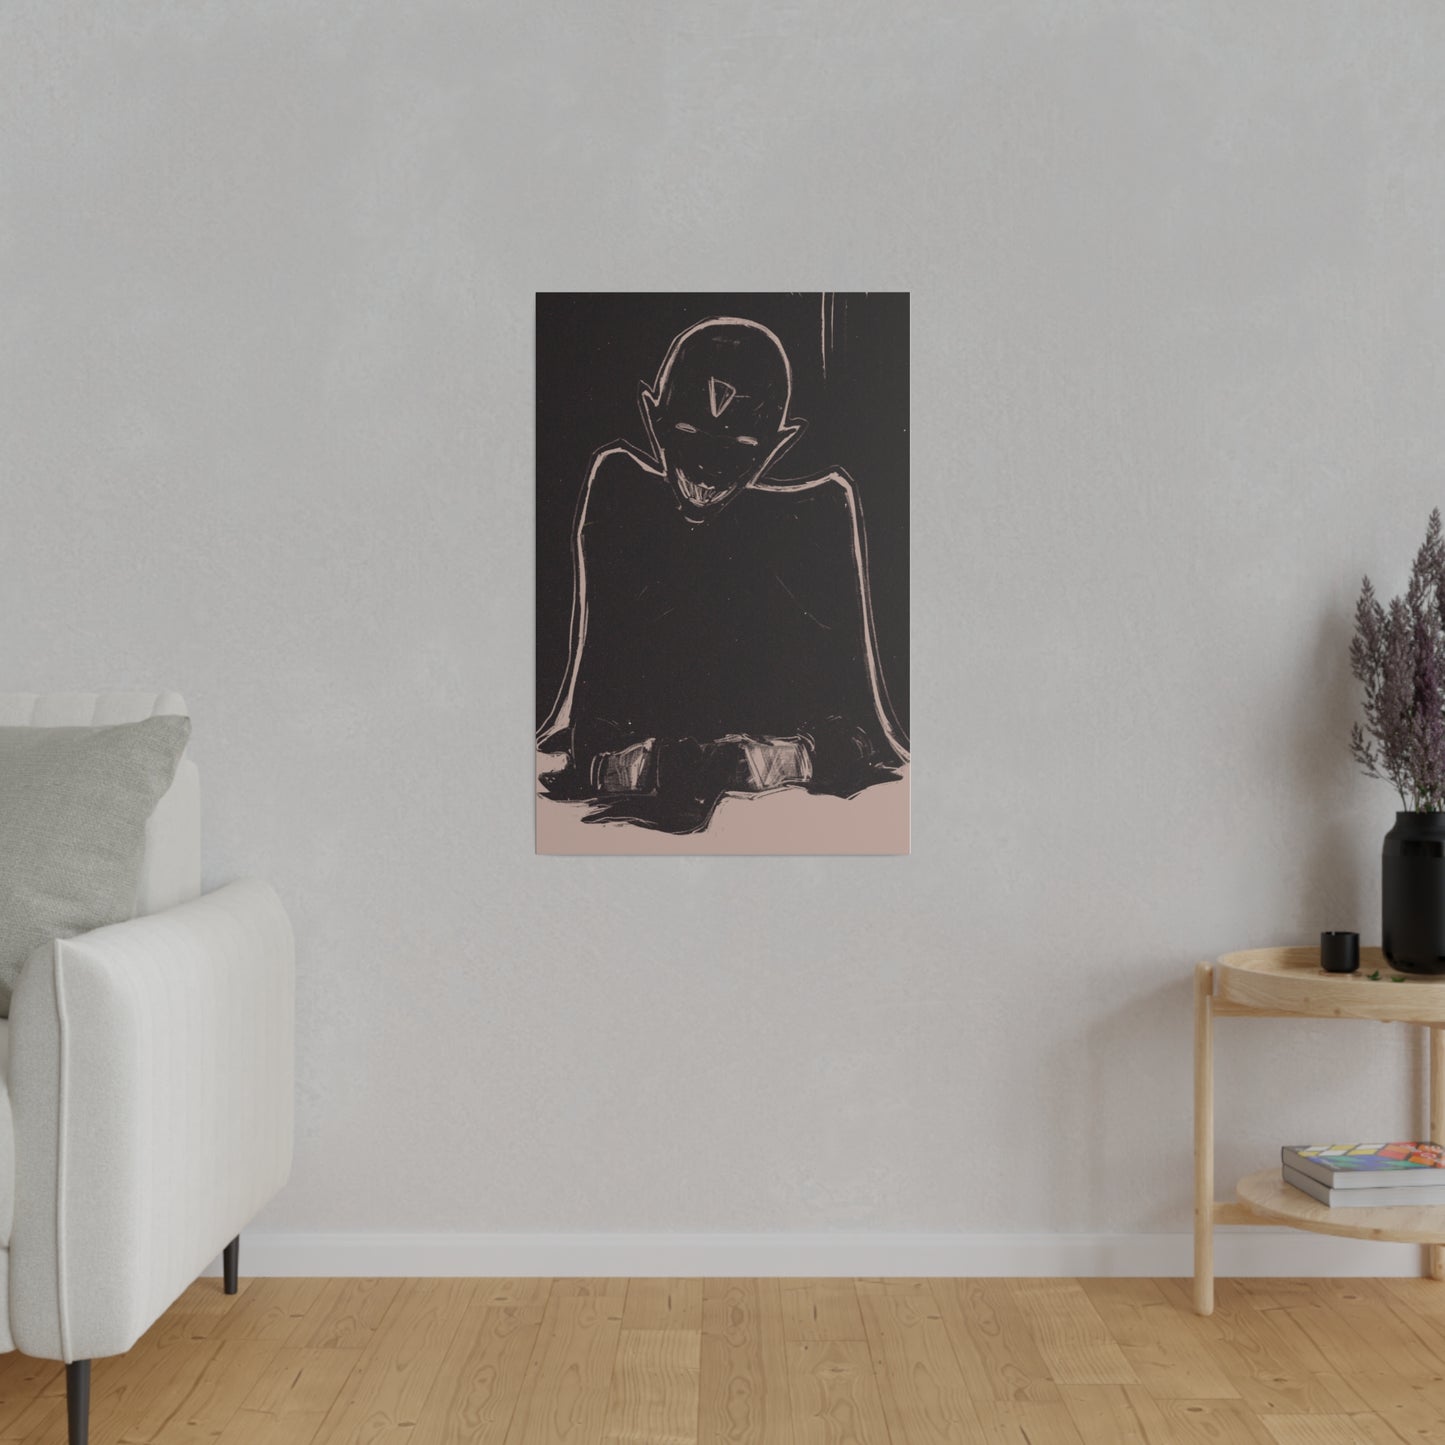 Dark Painting - Titled :Judgment -High Quality Matte Canvas, Stretched, 0.75"